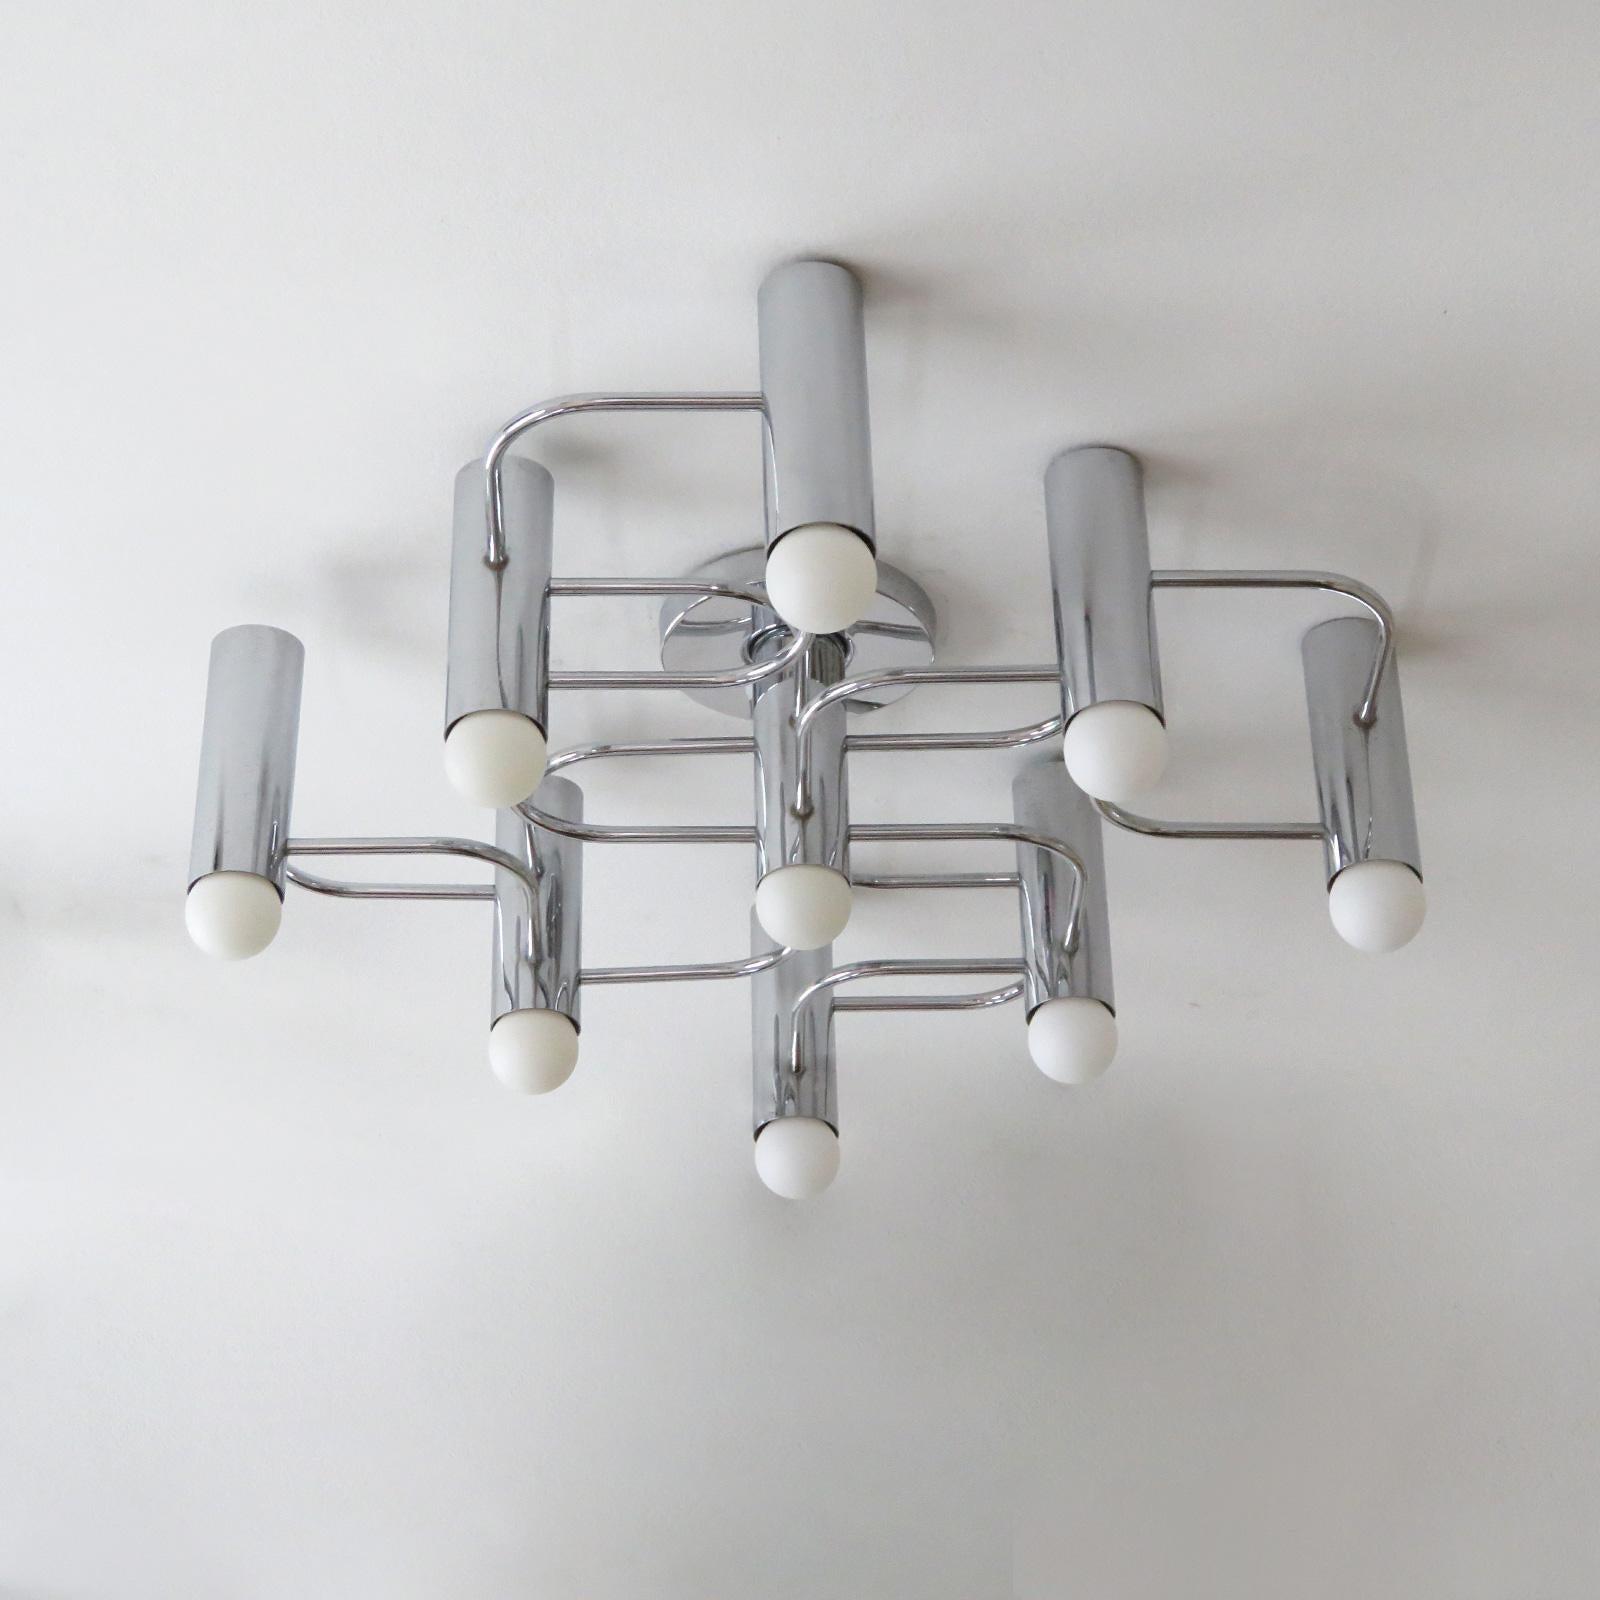 German Leola Flush Mount Light Fixture, 1970 In Good Condition For Sale In Los Angeles, CA